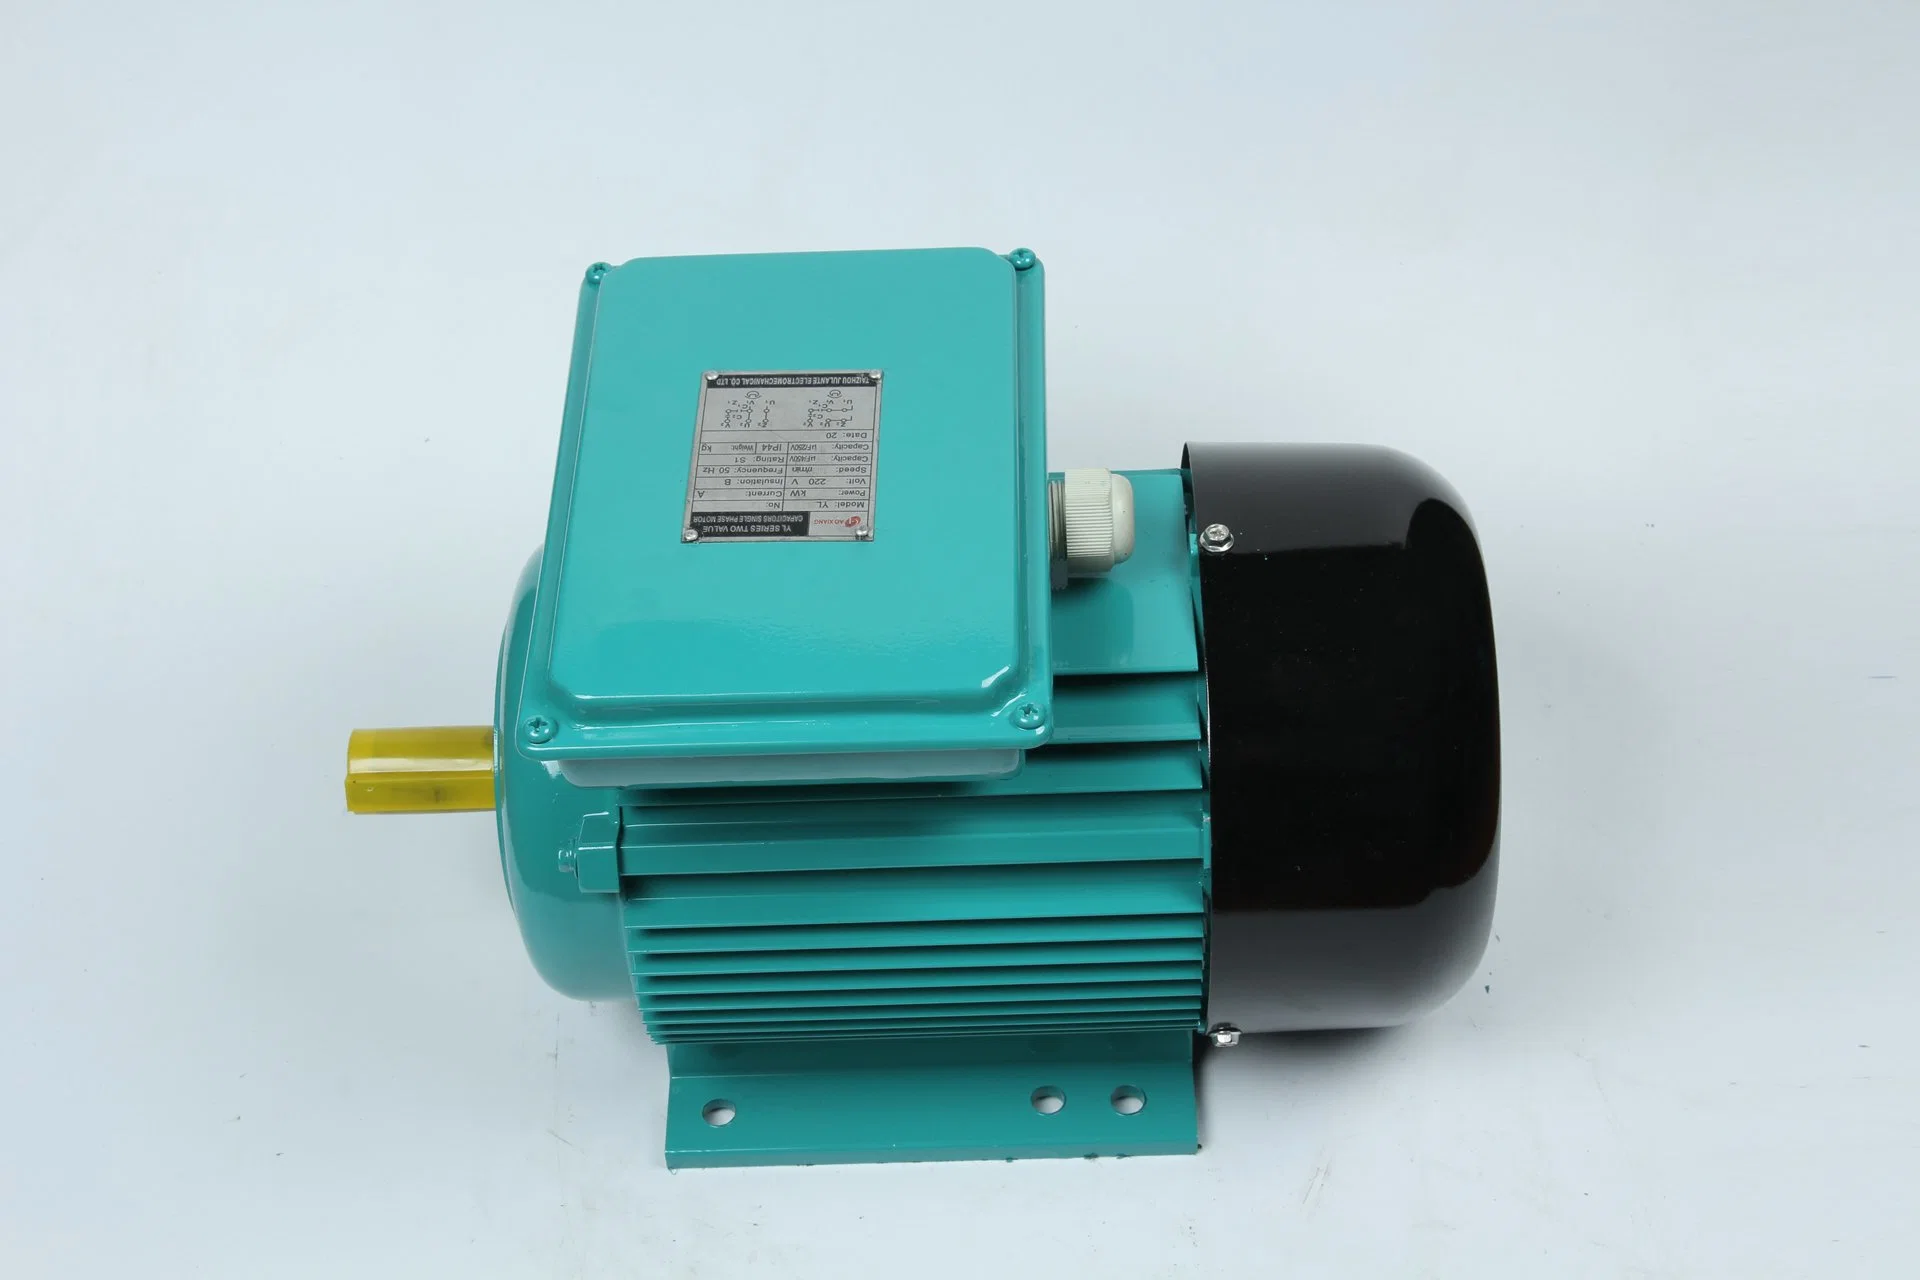 Yc/Ycl Series Heavy Duty Single Phase Electric Motors Capacitor Start Induction Motor 2p 0.5-3 HP